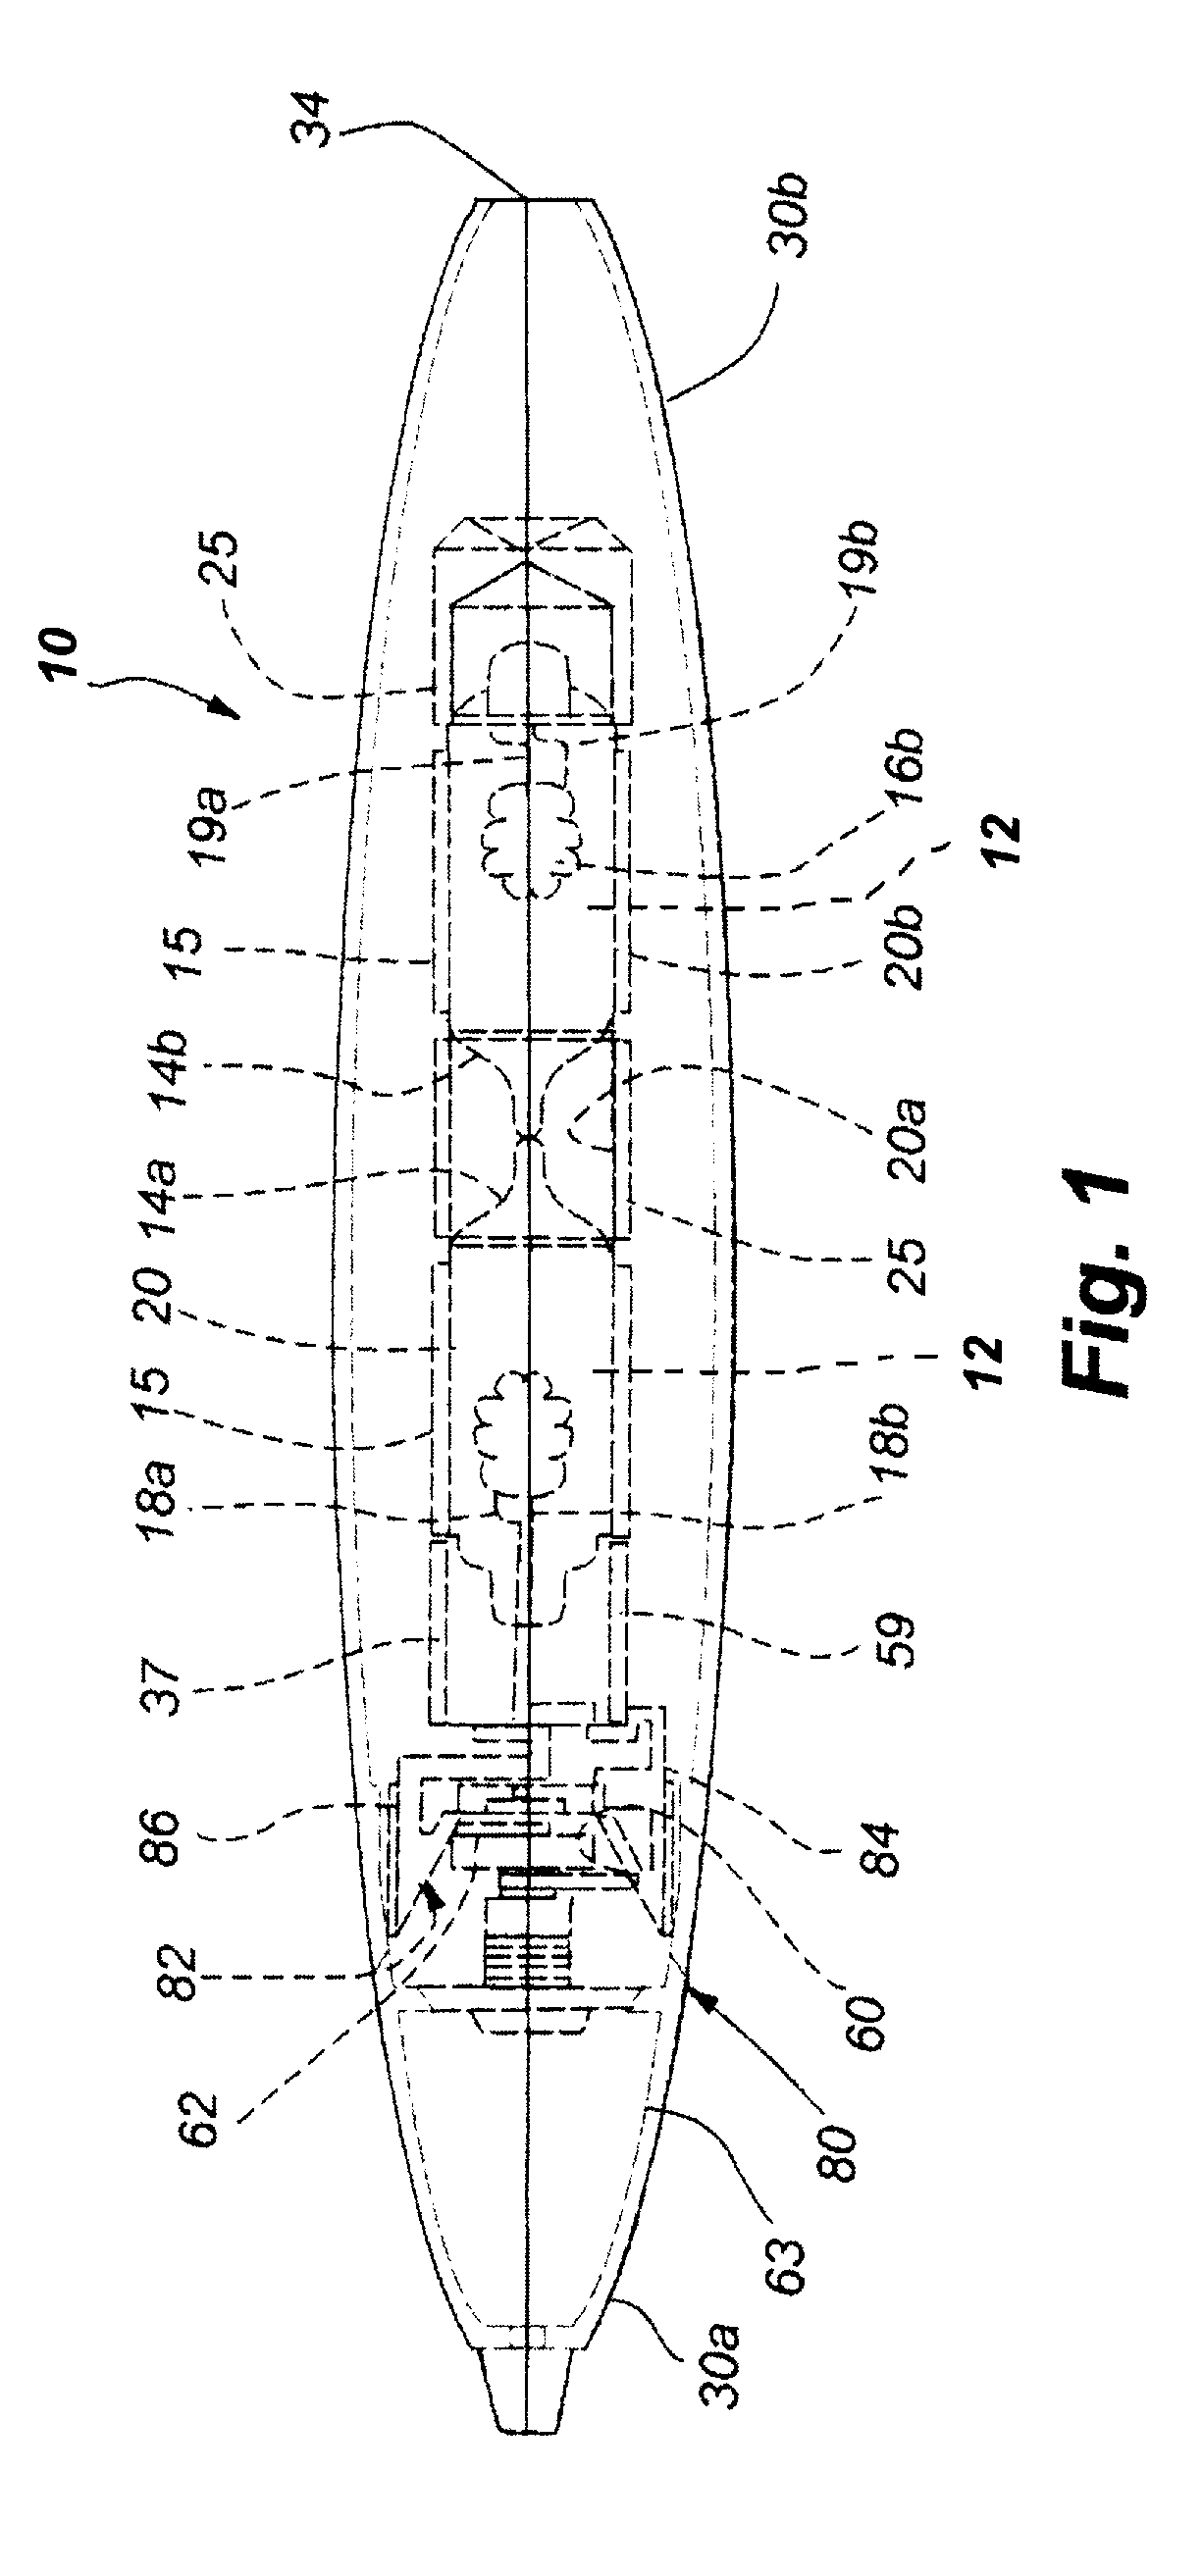 Method And Apparatus For Vaporizing A Compound